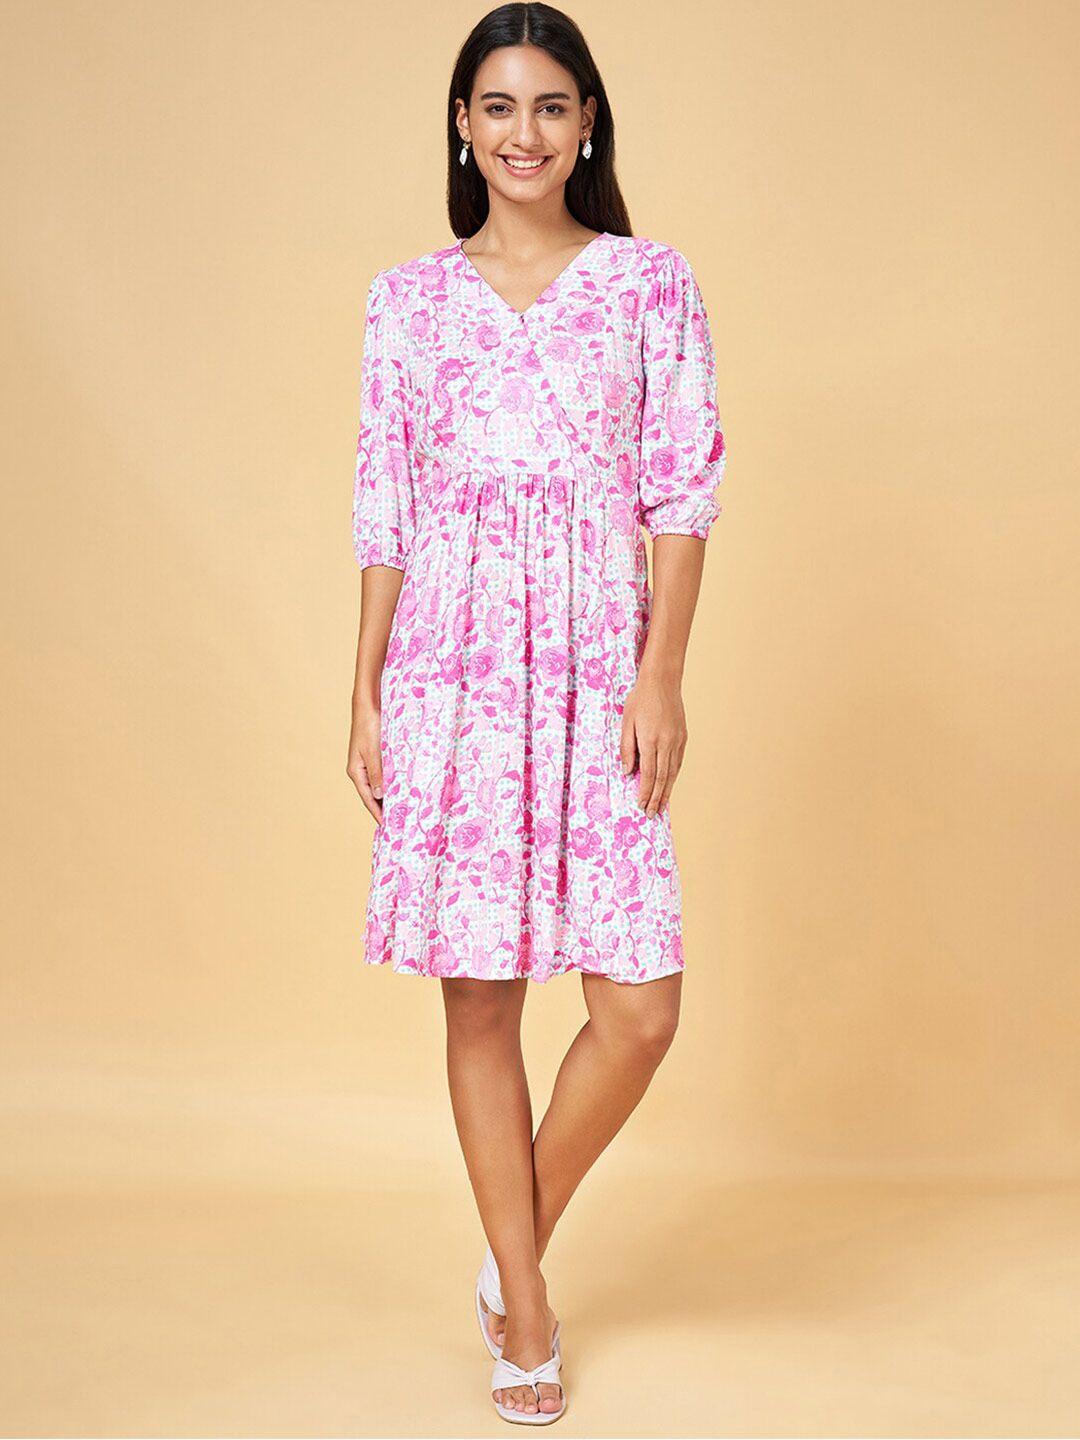 honey by pantaloons pink floral print fit & flare dress